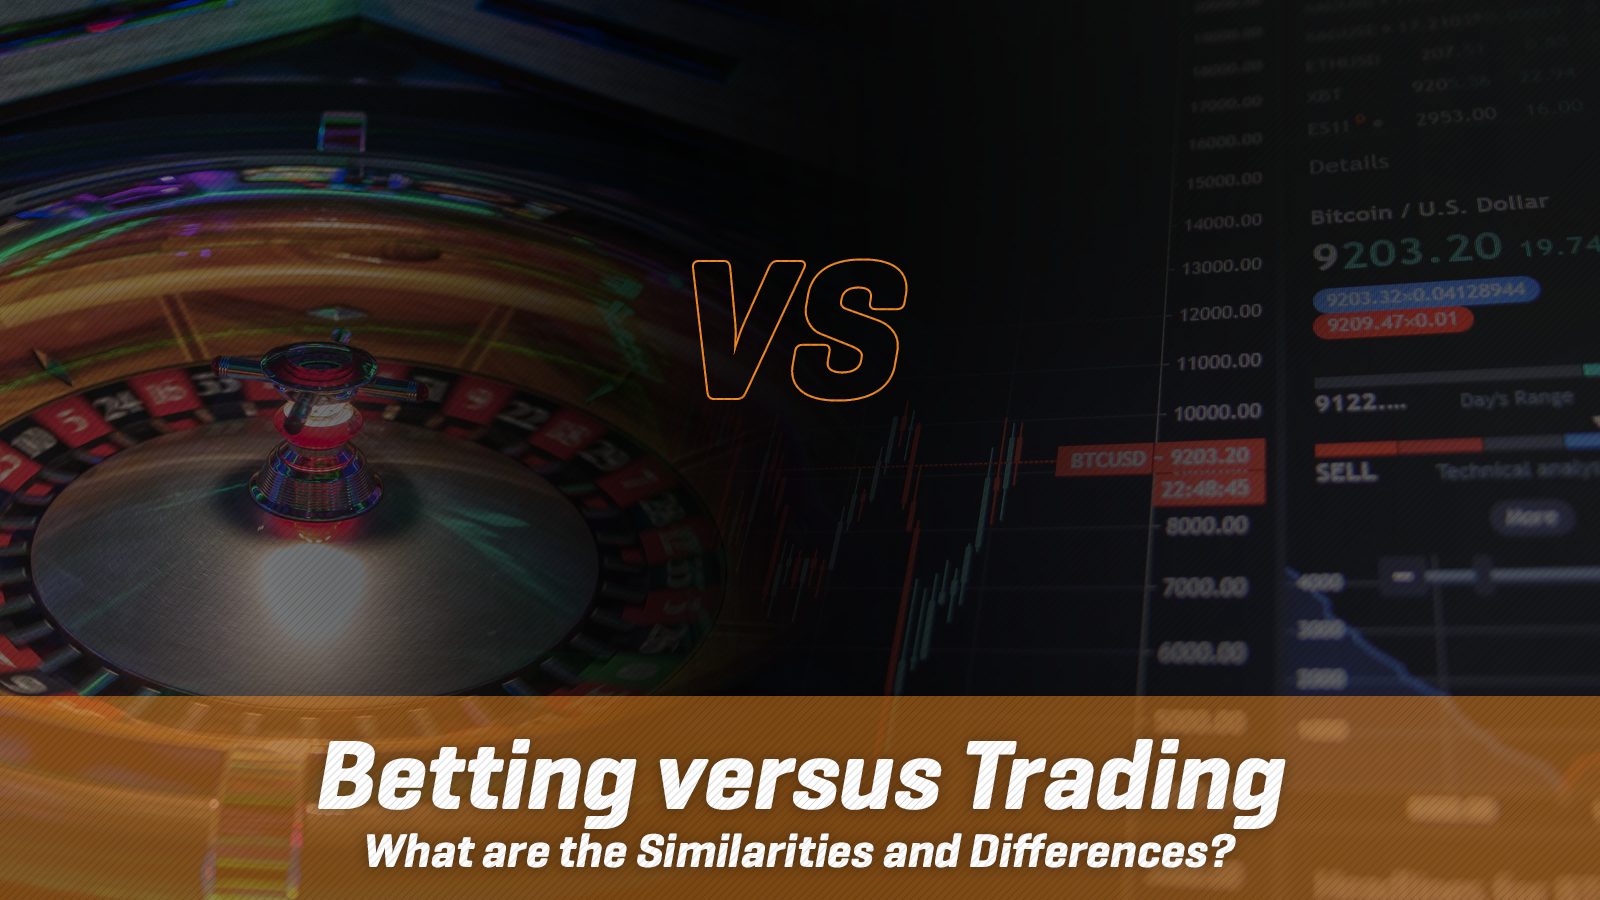 Betting versus Trading: What are the Similarities and Differences?